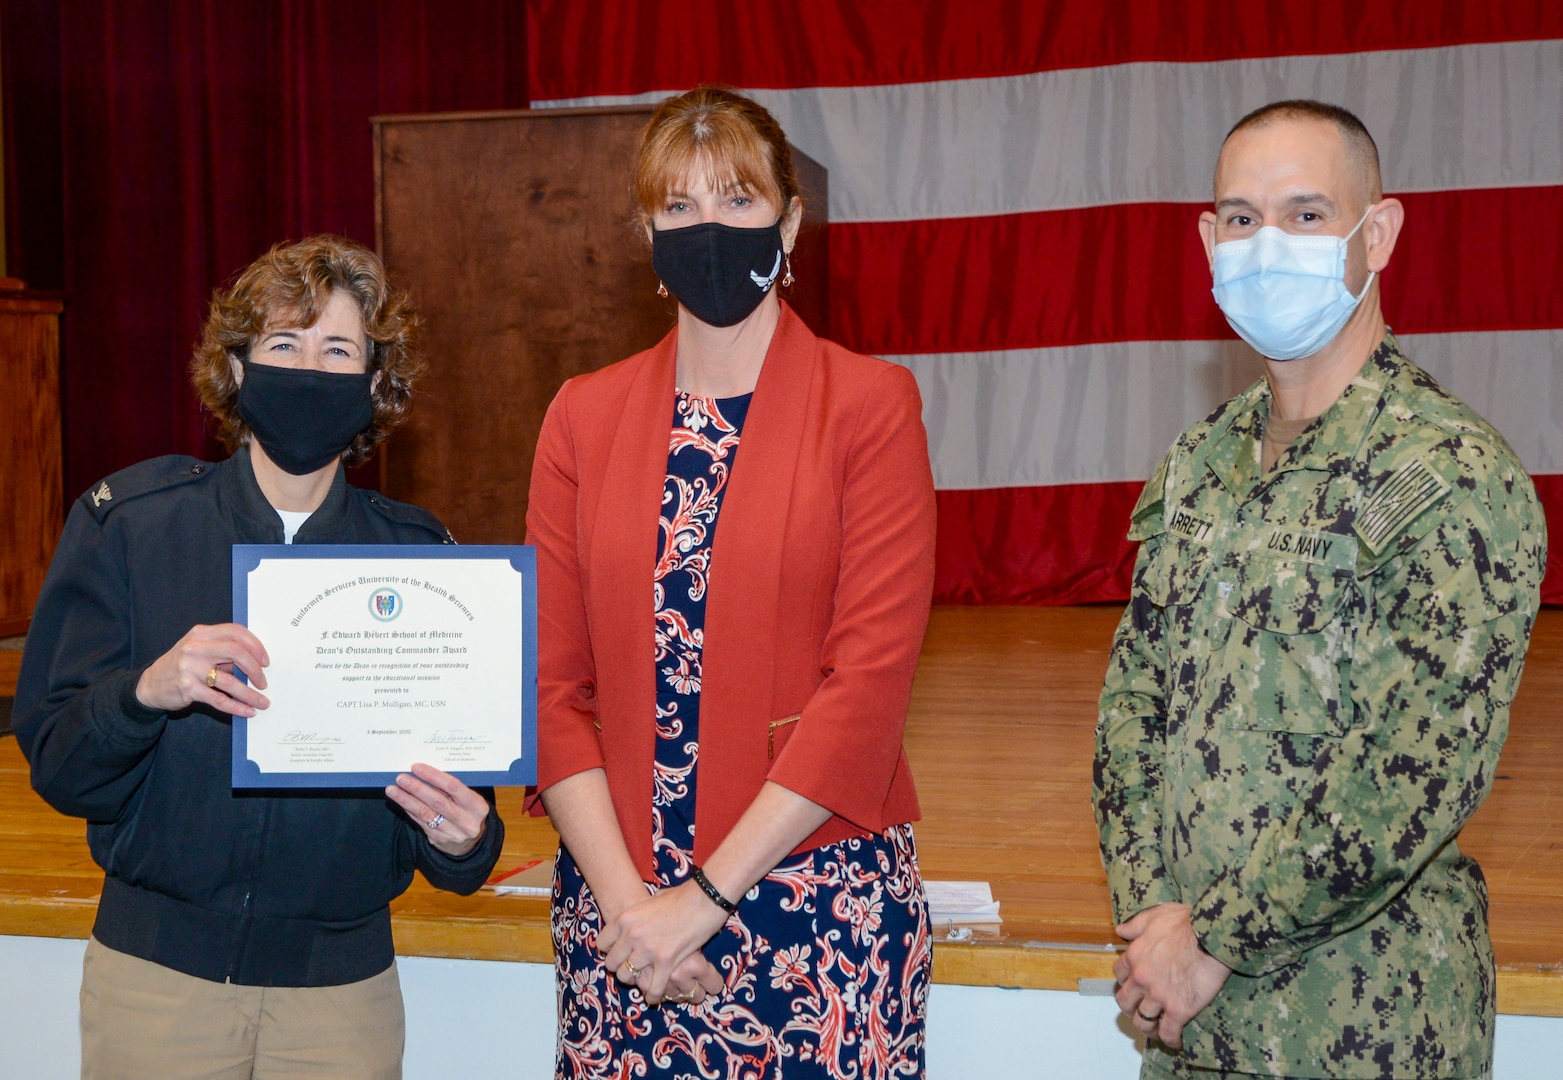 Capt. Lisa P. Mulligan, commanding officer of Naval Medical Center Portsmouth (NMCP), receives the Dean’s Outstanding Commander Award from the Uniformed Services University of Health Sciences at an award ceremony in the NMCP auditorium on Nov. 4.